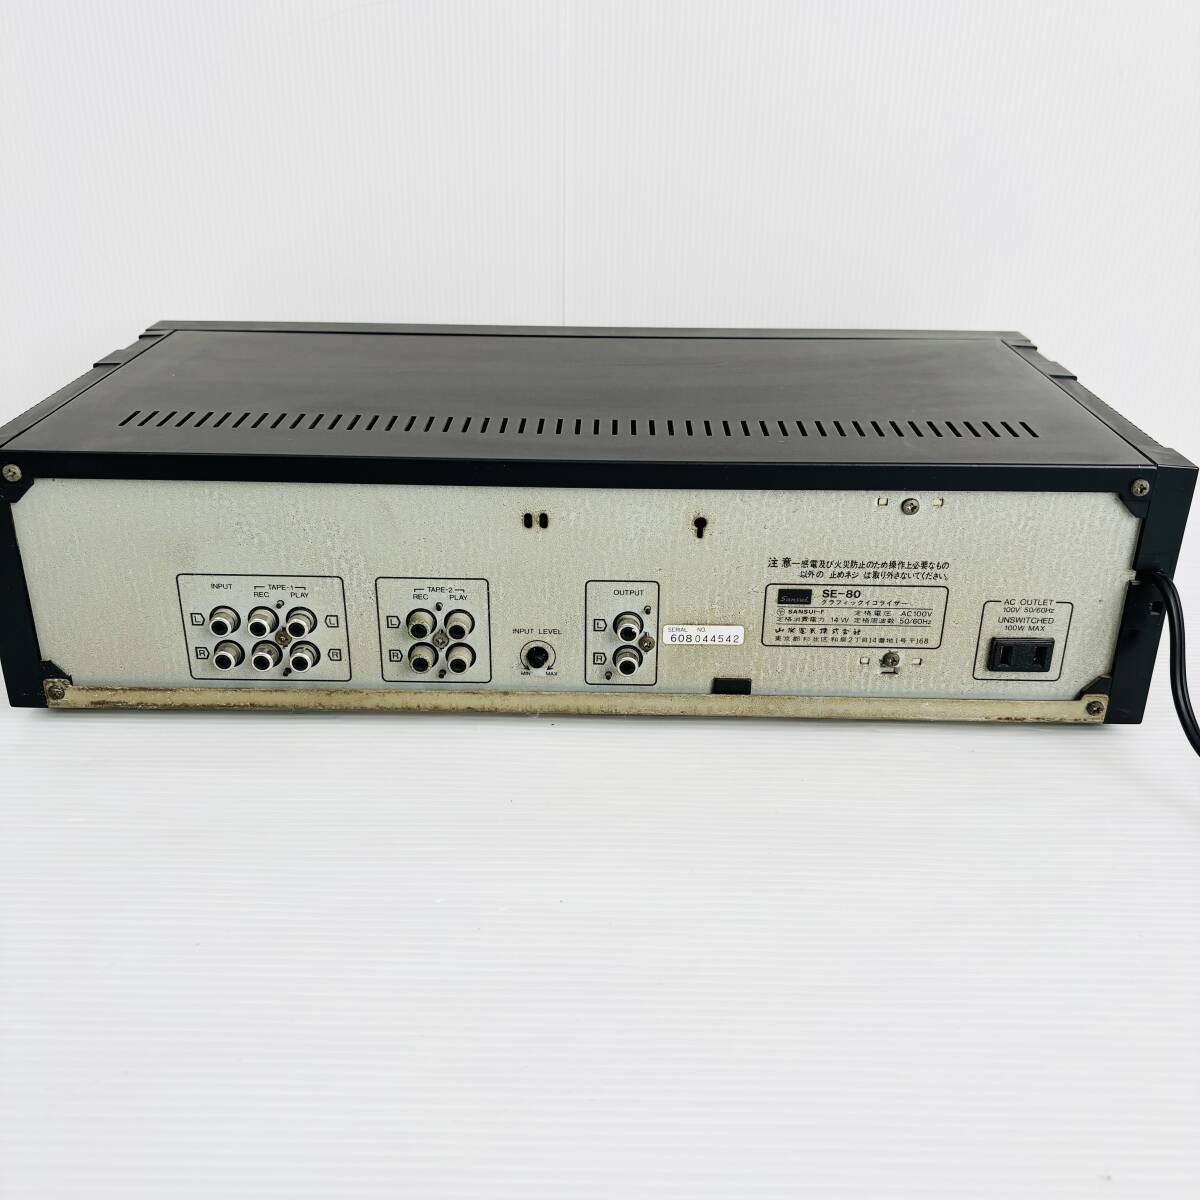 SANSUI SE-80 ステレオグラフィックイコライザー サンスイ STEREO GRAPHIC EQUALIZER 音響 黒物 アンプの画像10